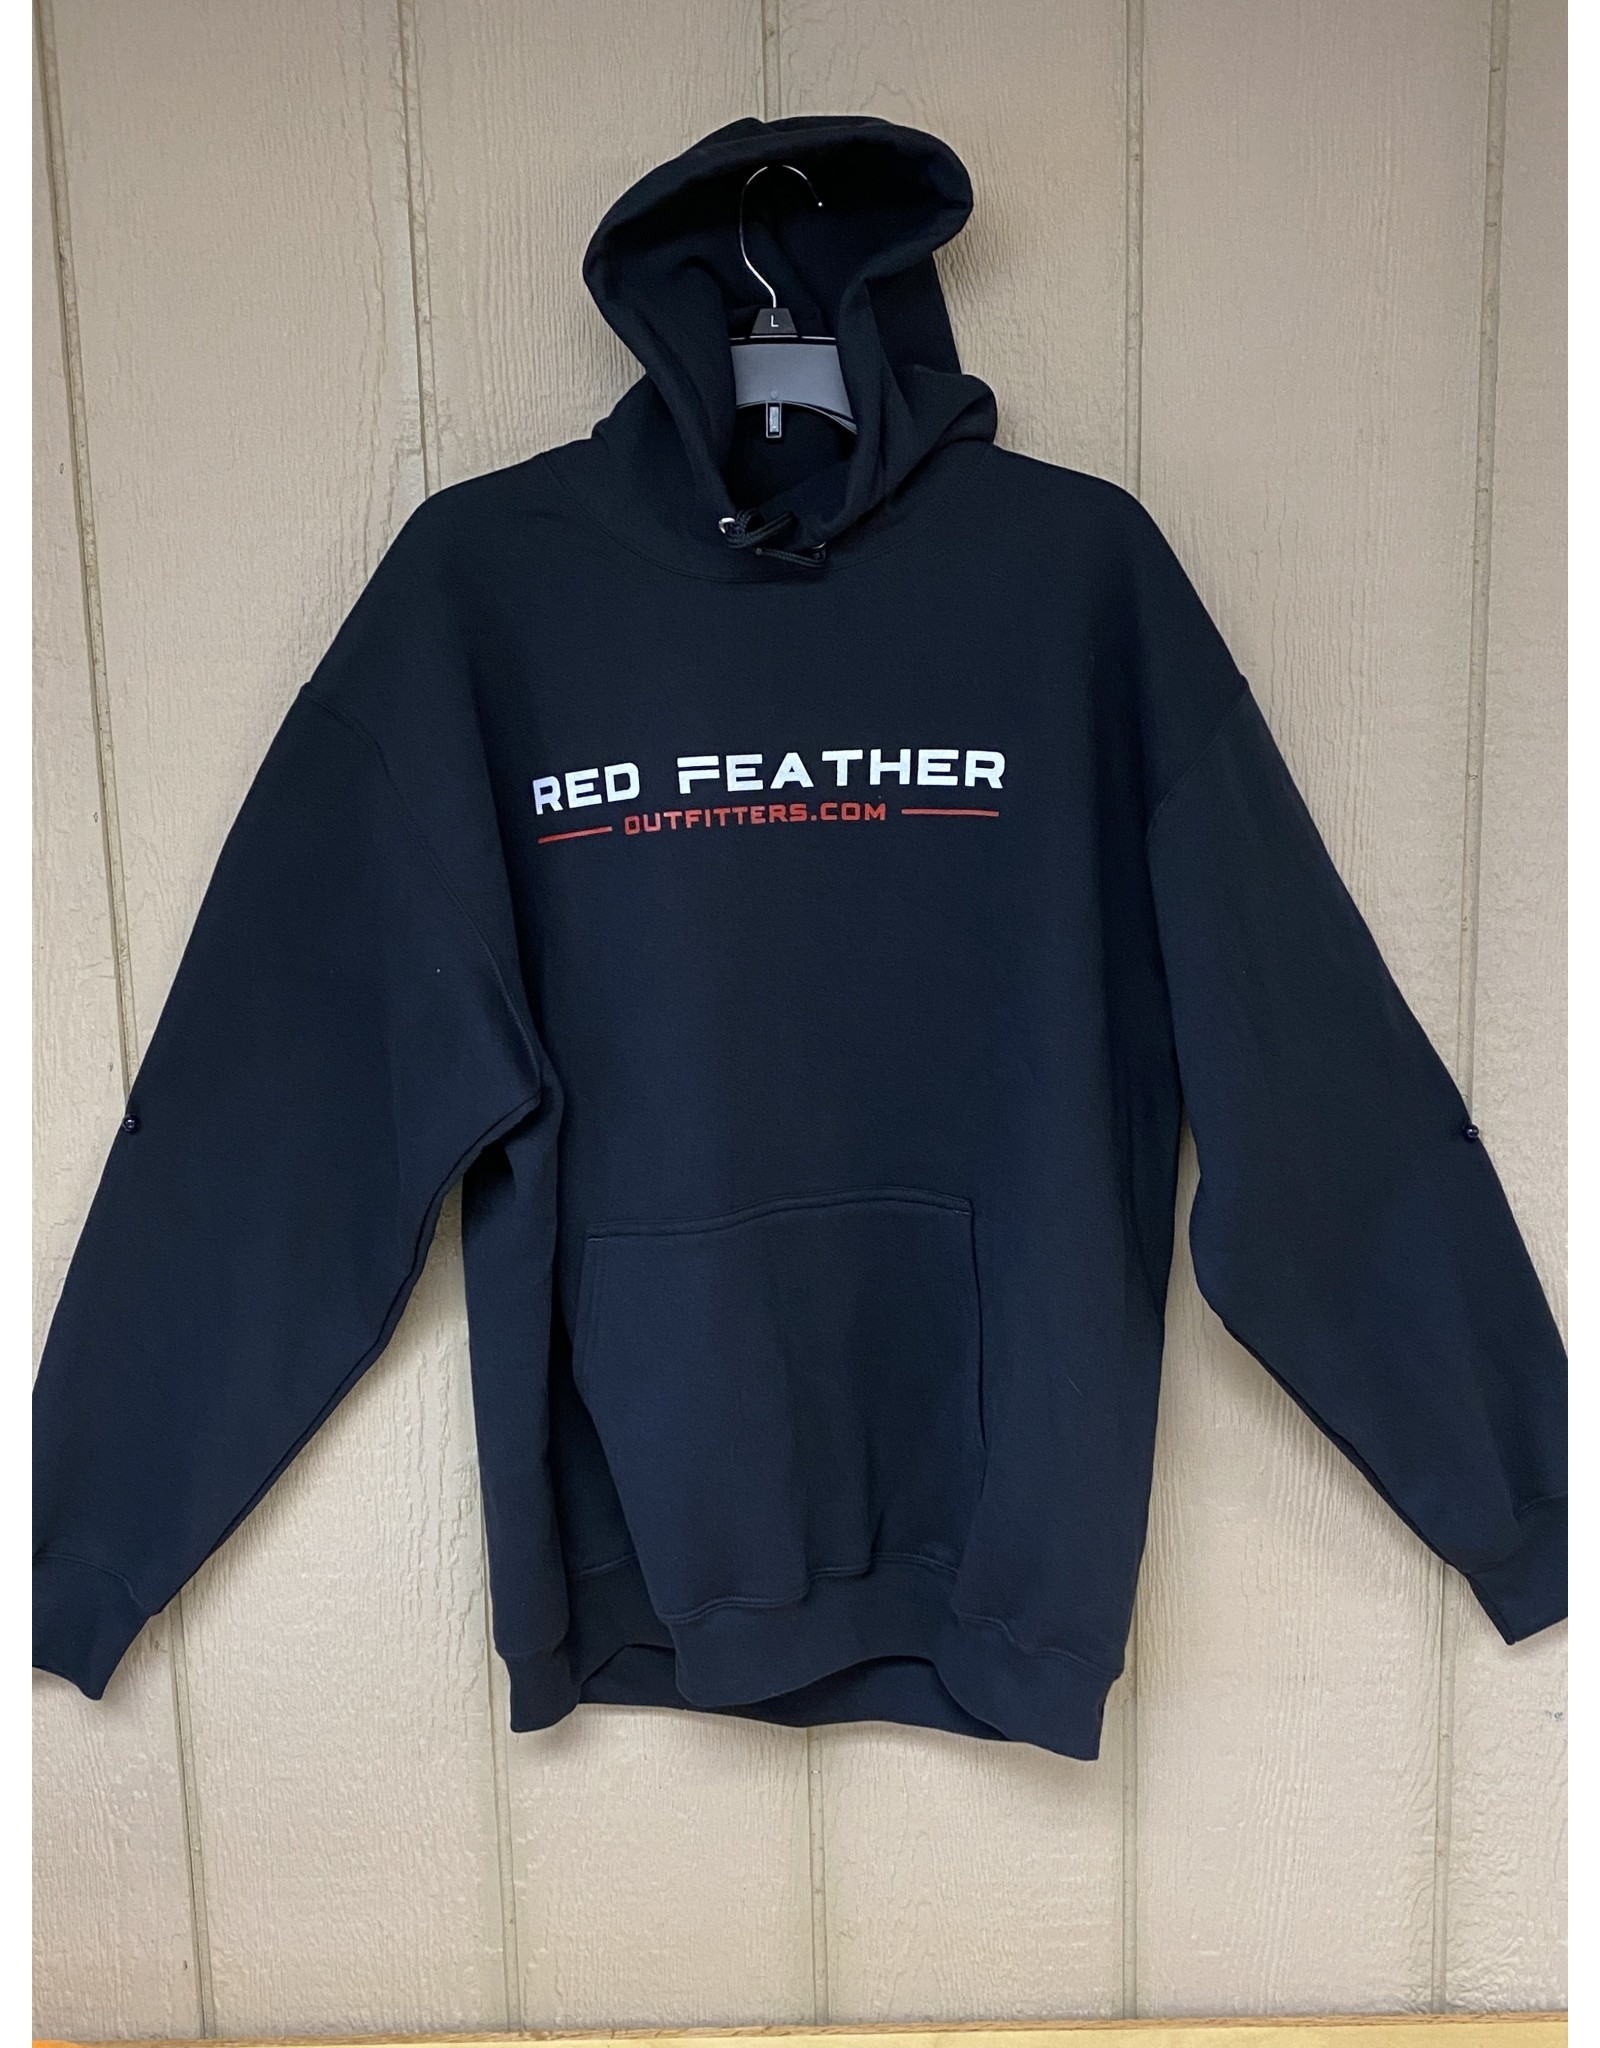 Hoodie, Red Feather Outfitters, Large TALL